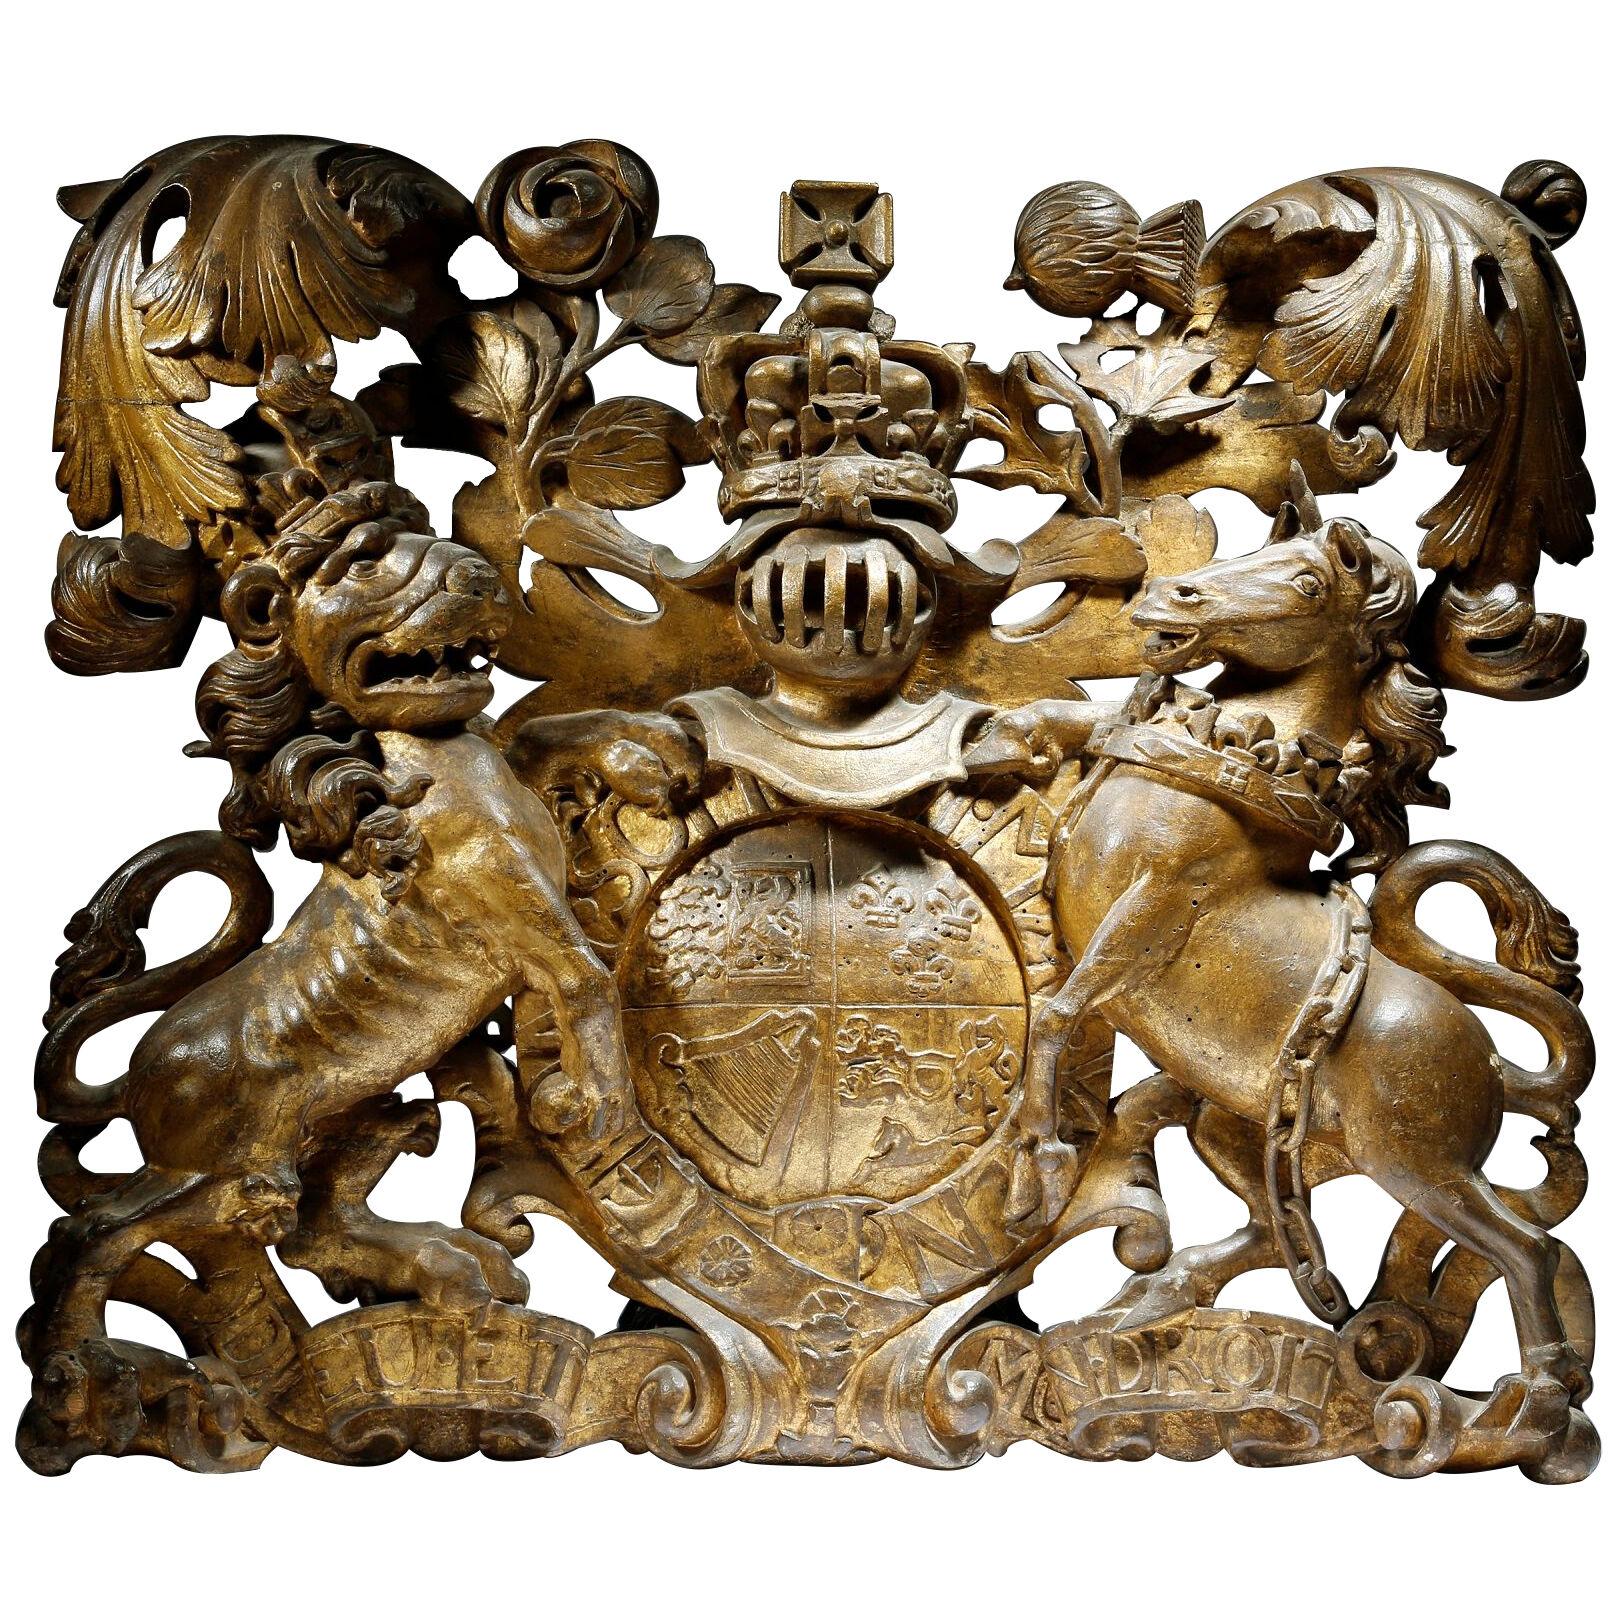 18th century Royal coat of arms